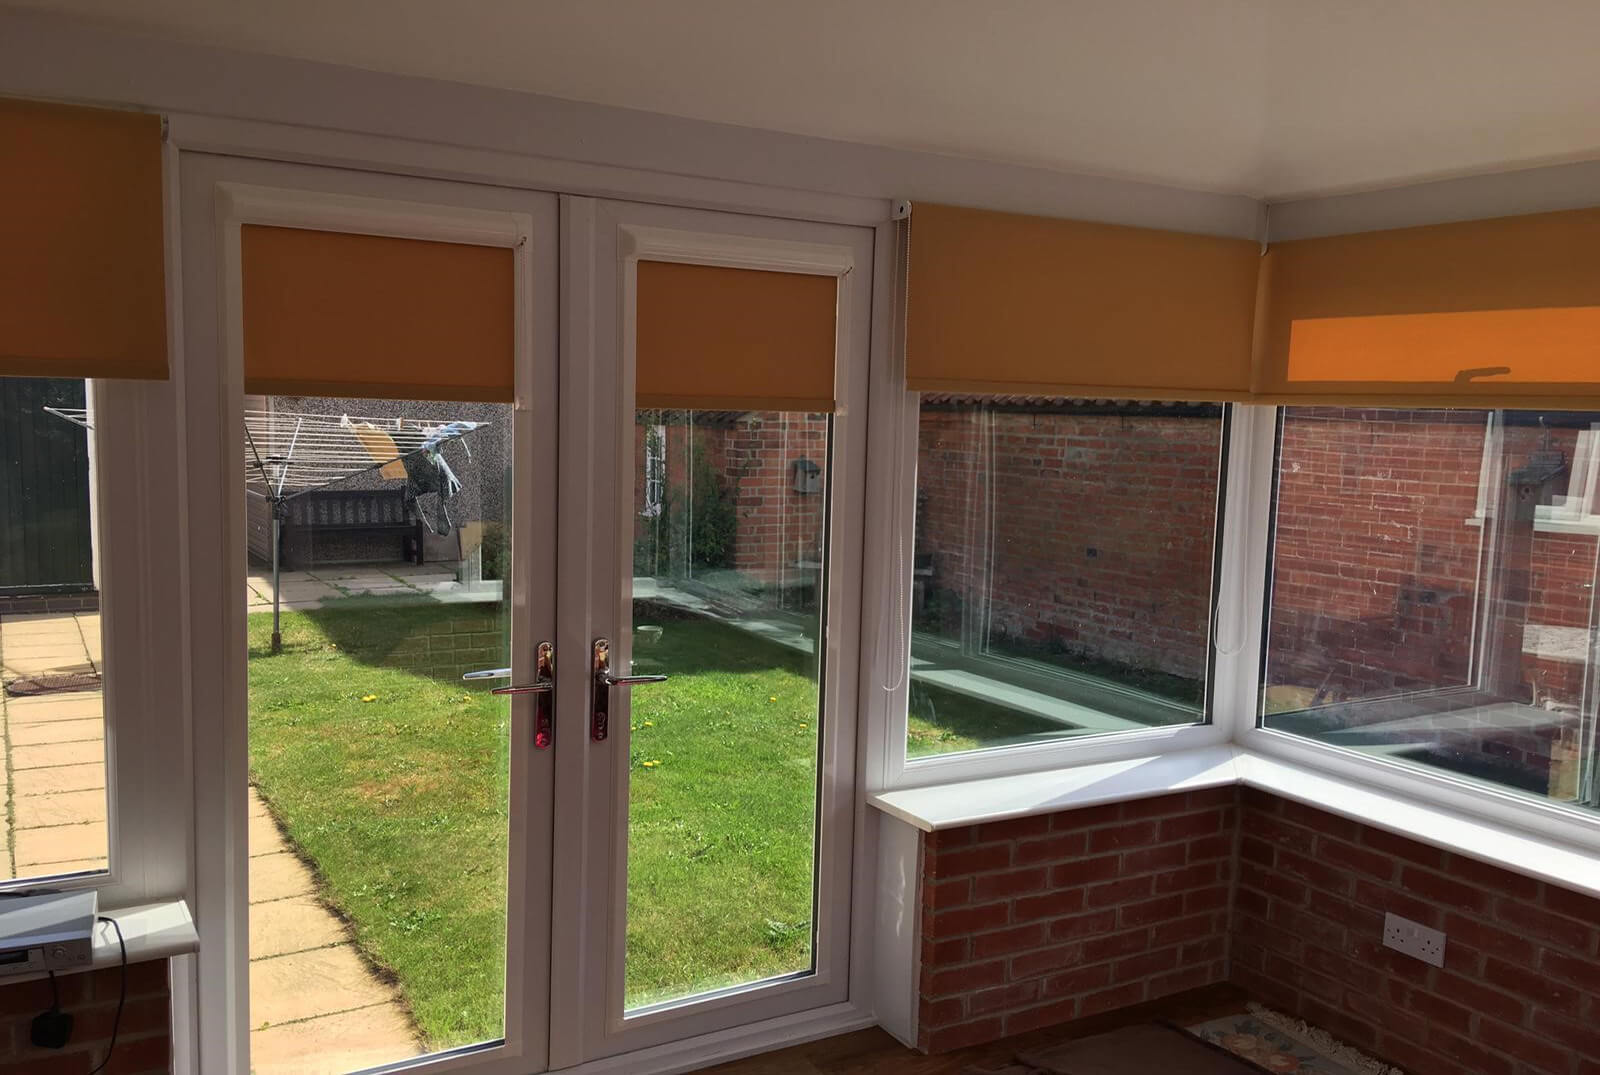 UPVC Windows Perfect Fit Blinds